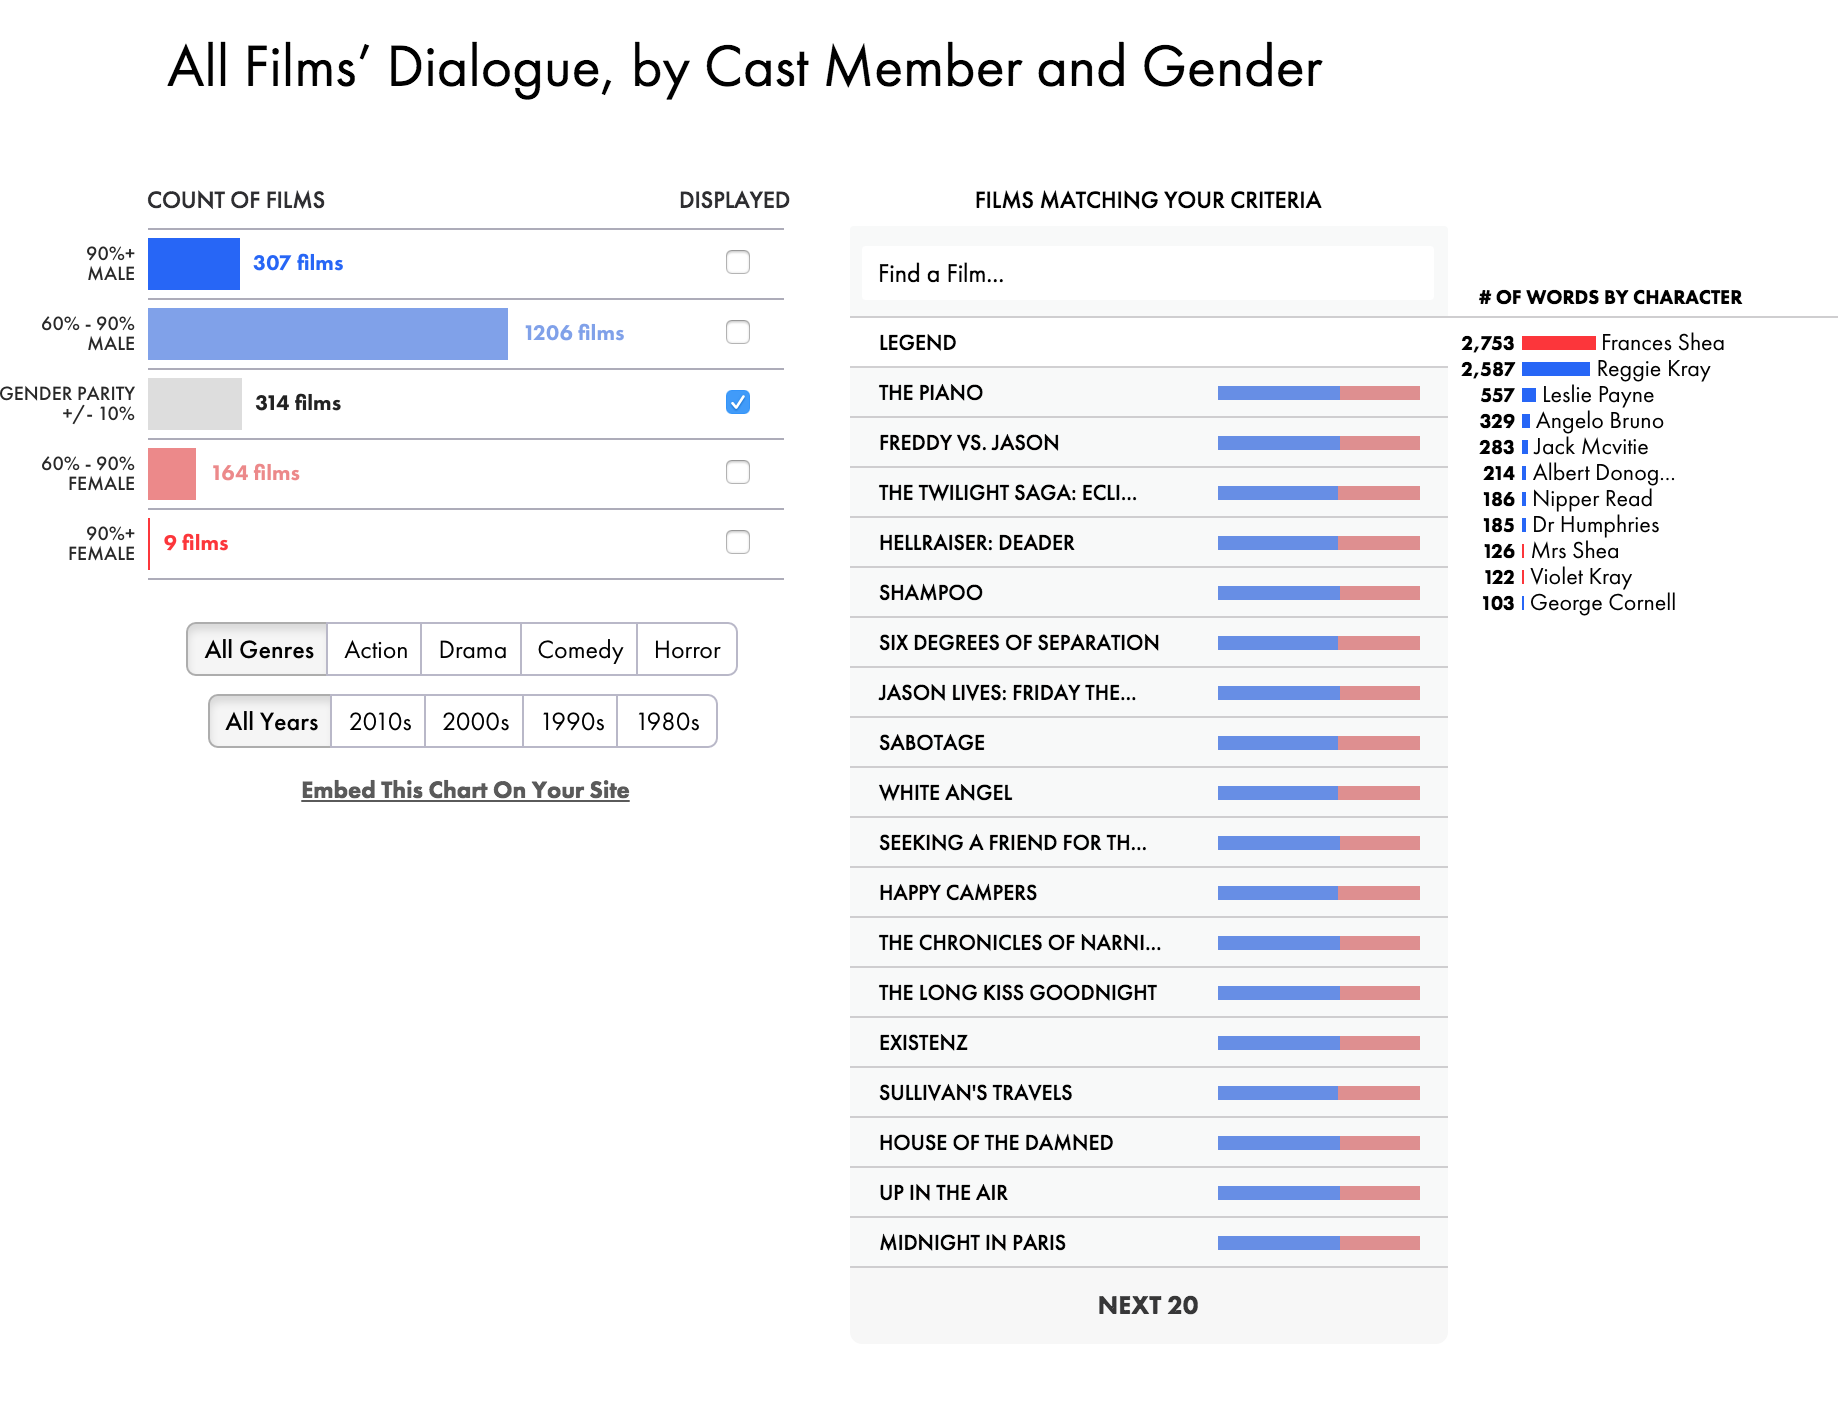 An interactive bar chart data visualization shows film character dialogue by gender